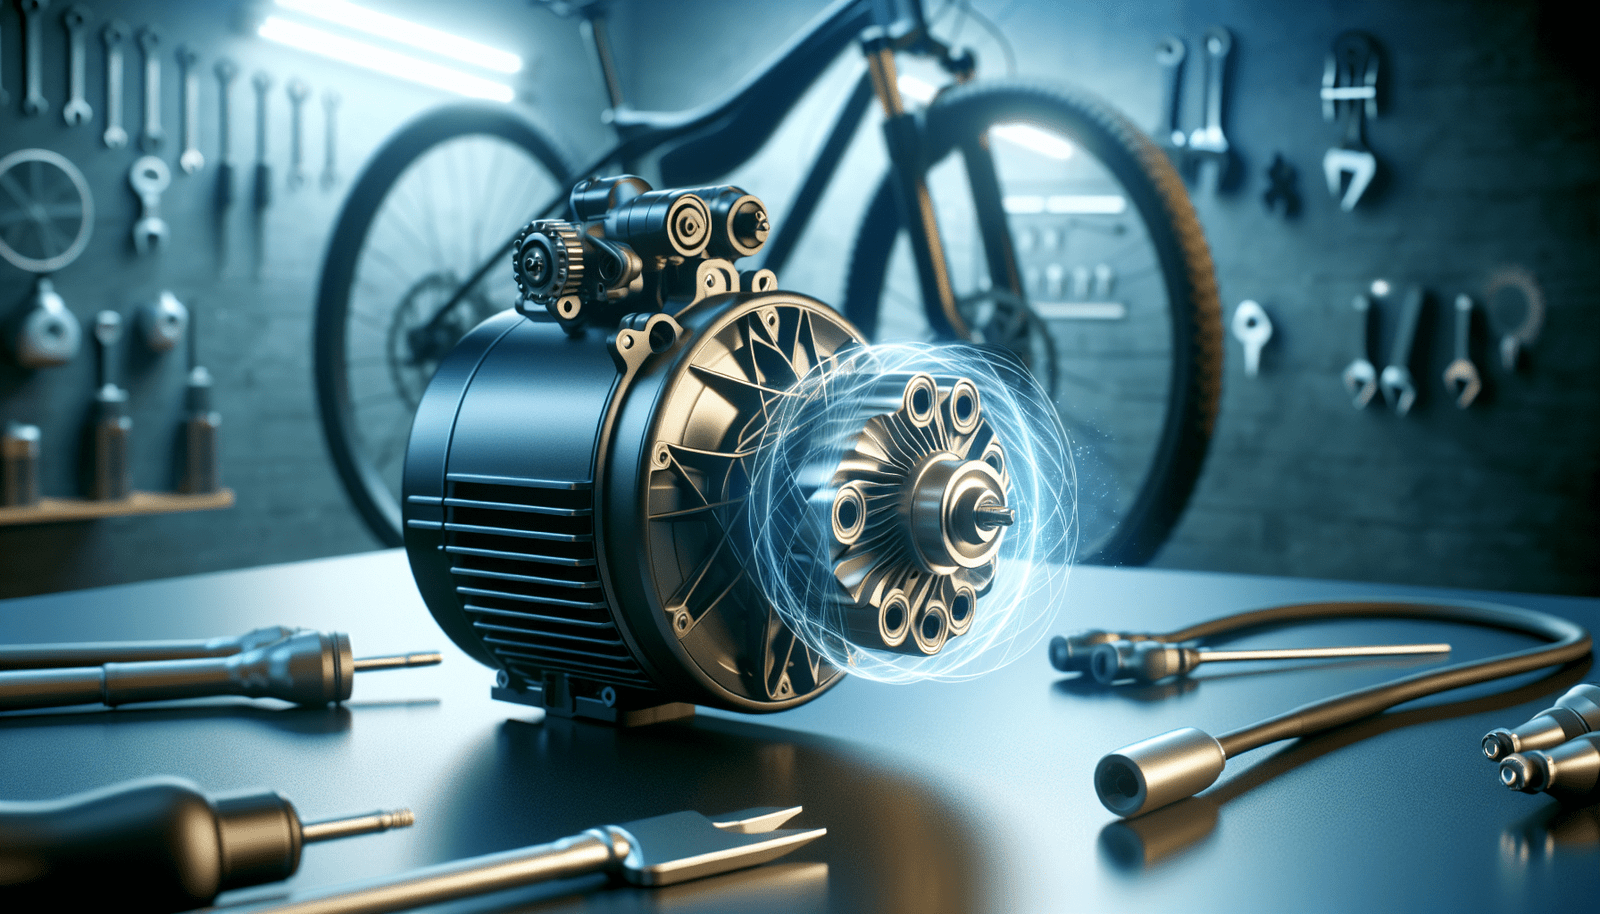 Are There Any Restrictions On The Power Output Of Electric Bike Motors?